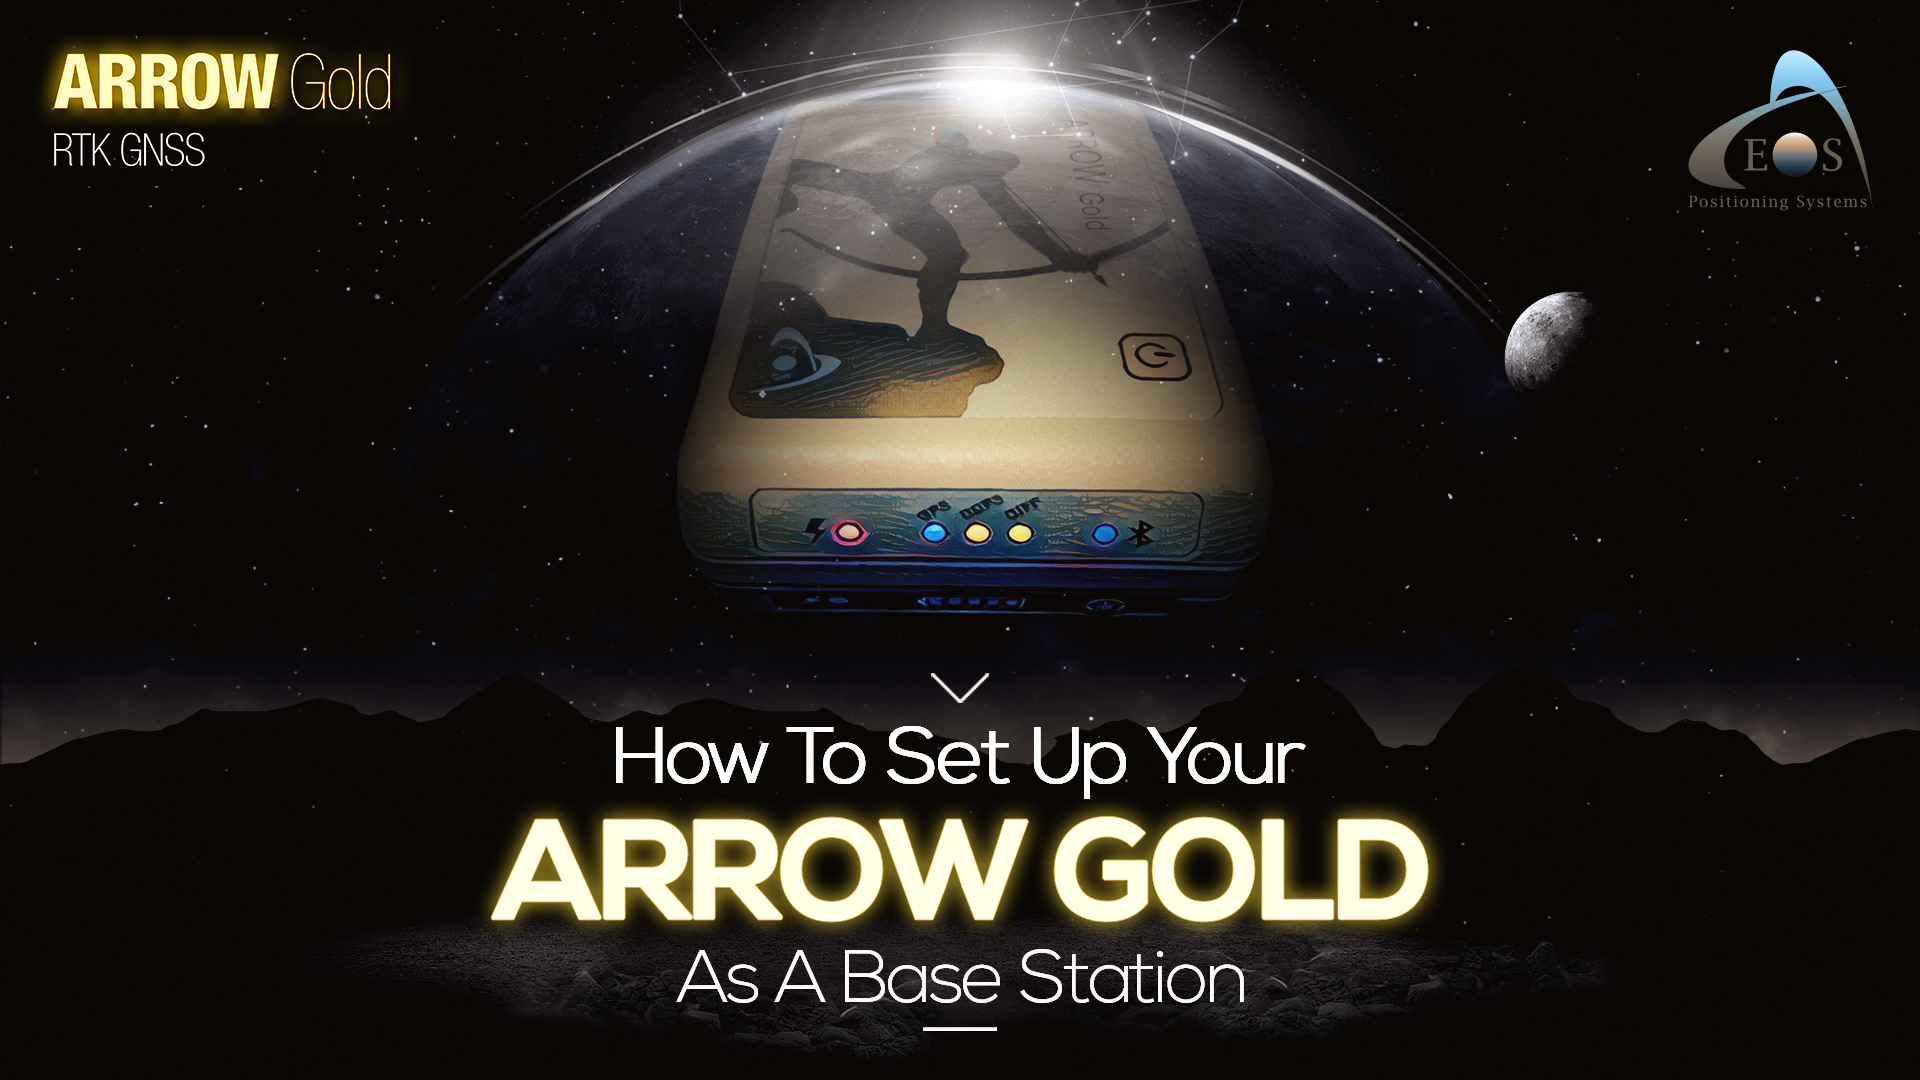 FEATURE IMAGE - ARTICLE - HOW TO SET UP YOUR ARROW GOLD AS A BASE STATION